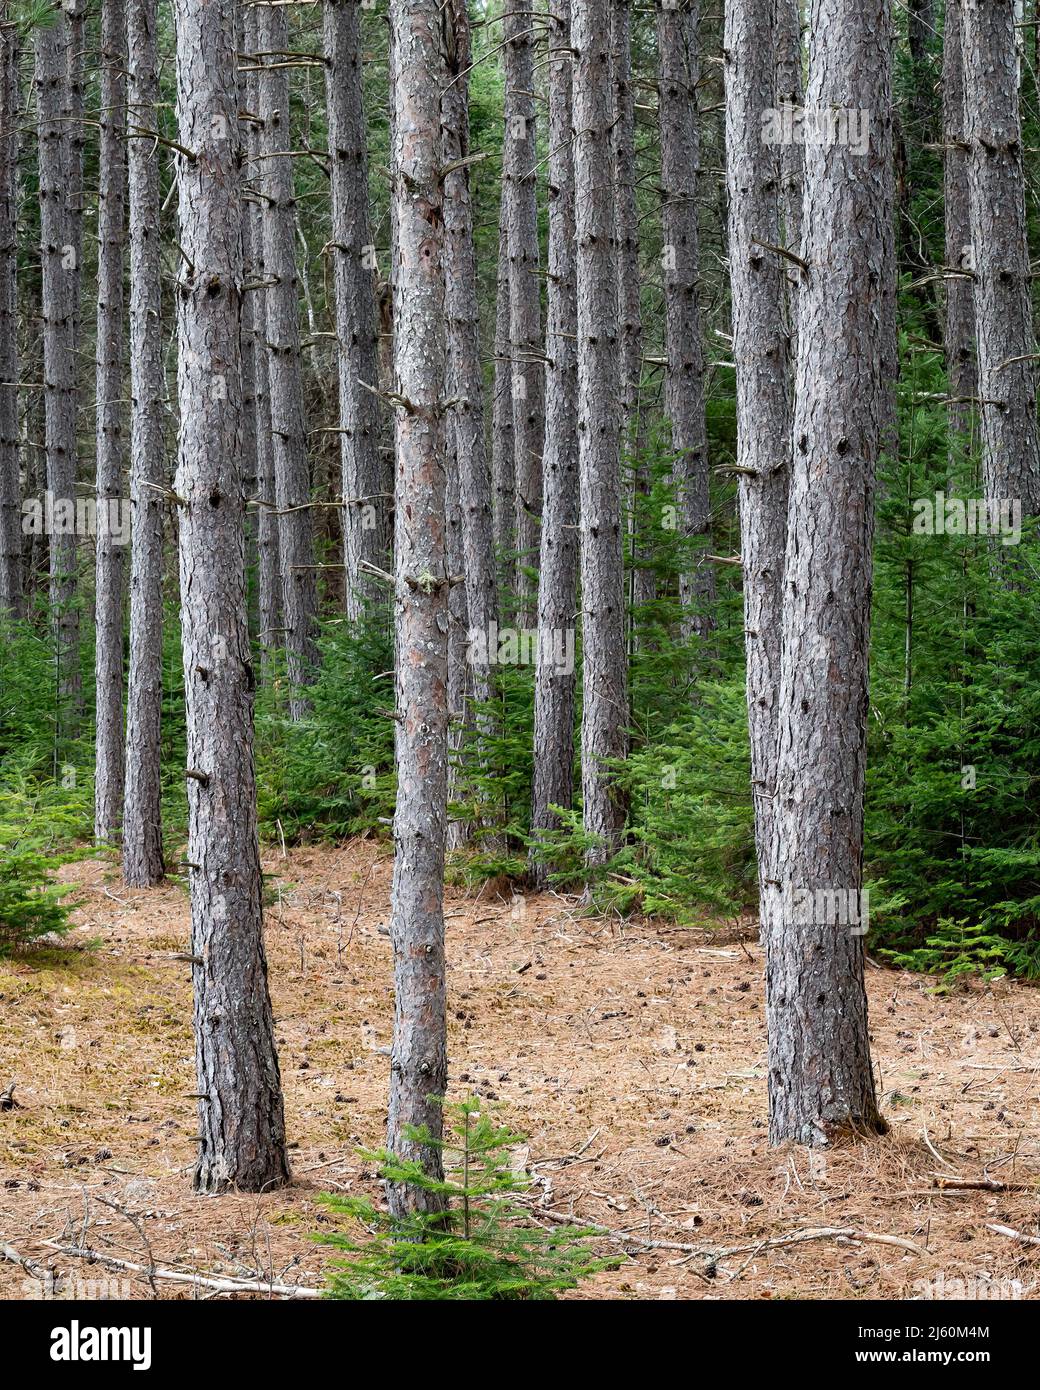 A pine plantation in the Speculator Tree Farm in the Adirondack Mountains, NY in early spring Stock Photo